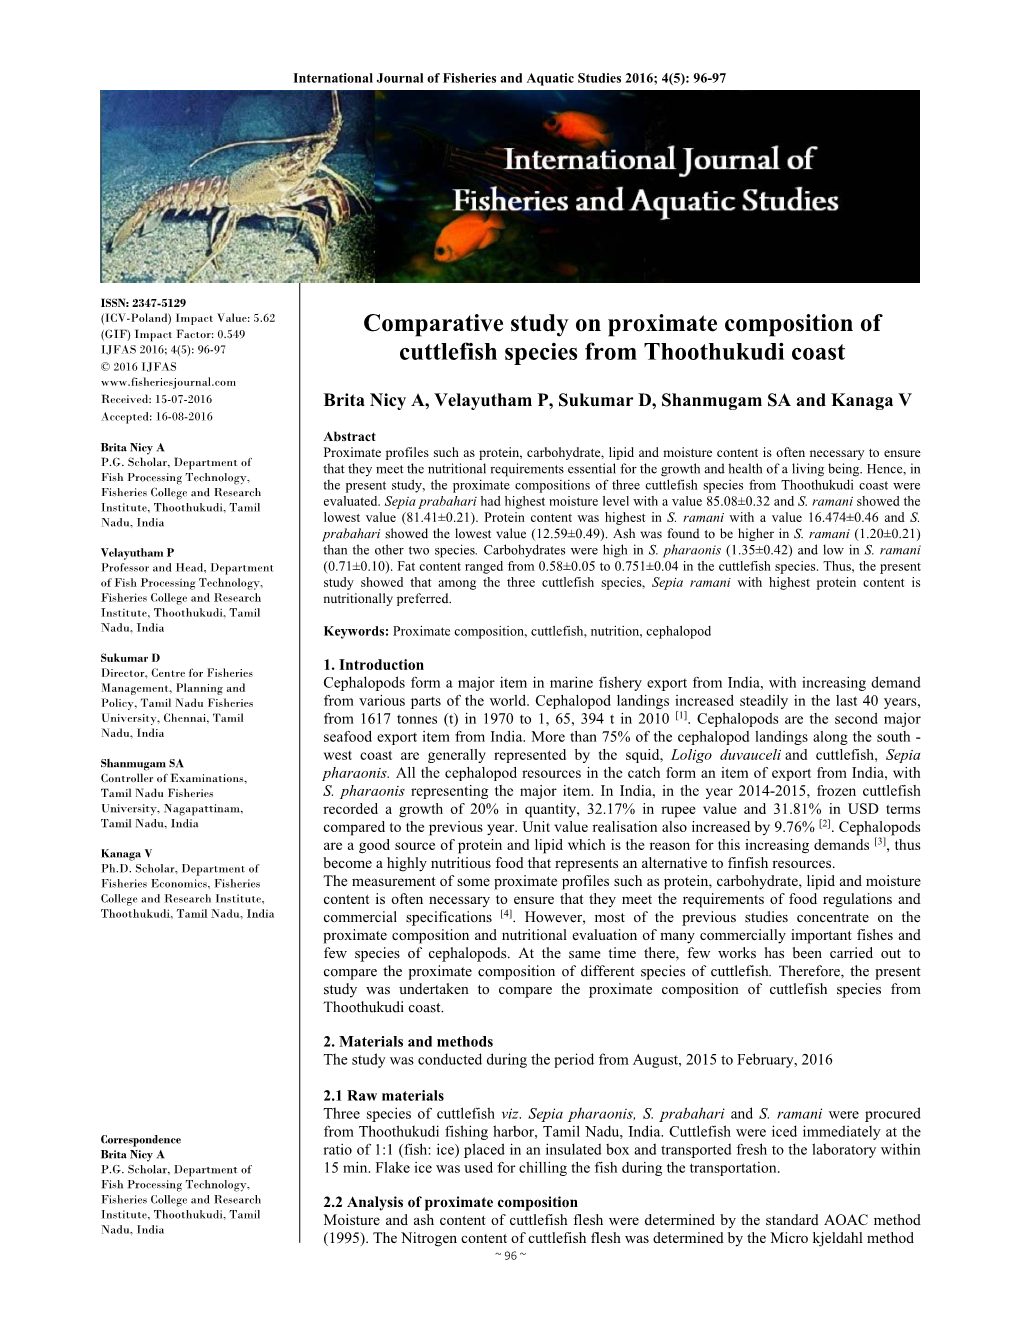 Comparative Study on Proximate Composition of Cuttlefish Species